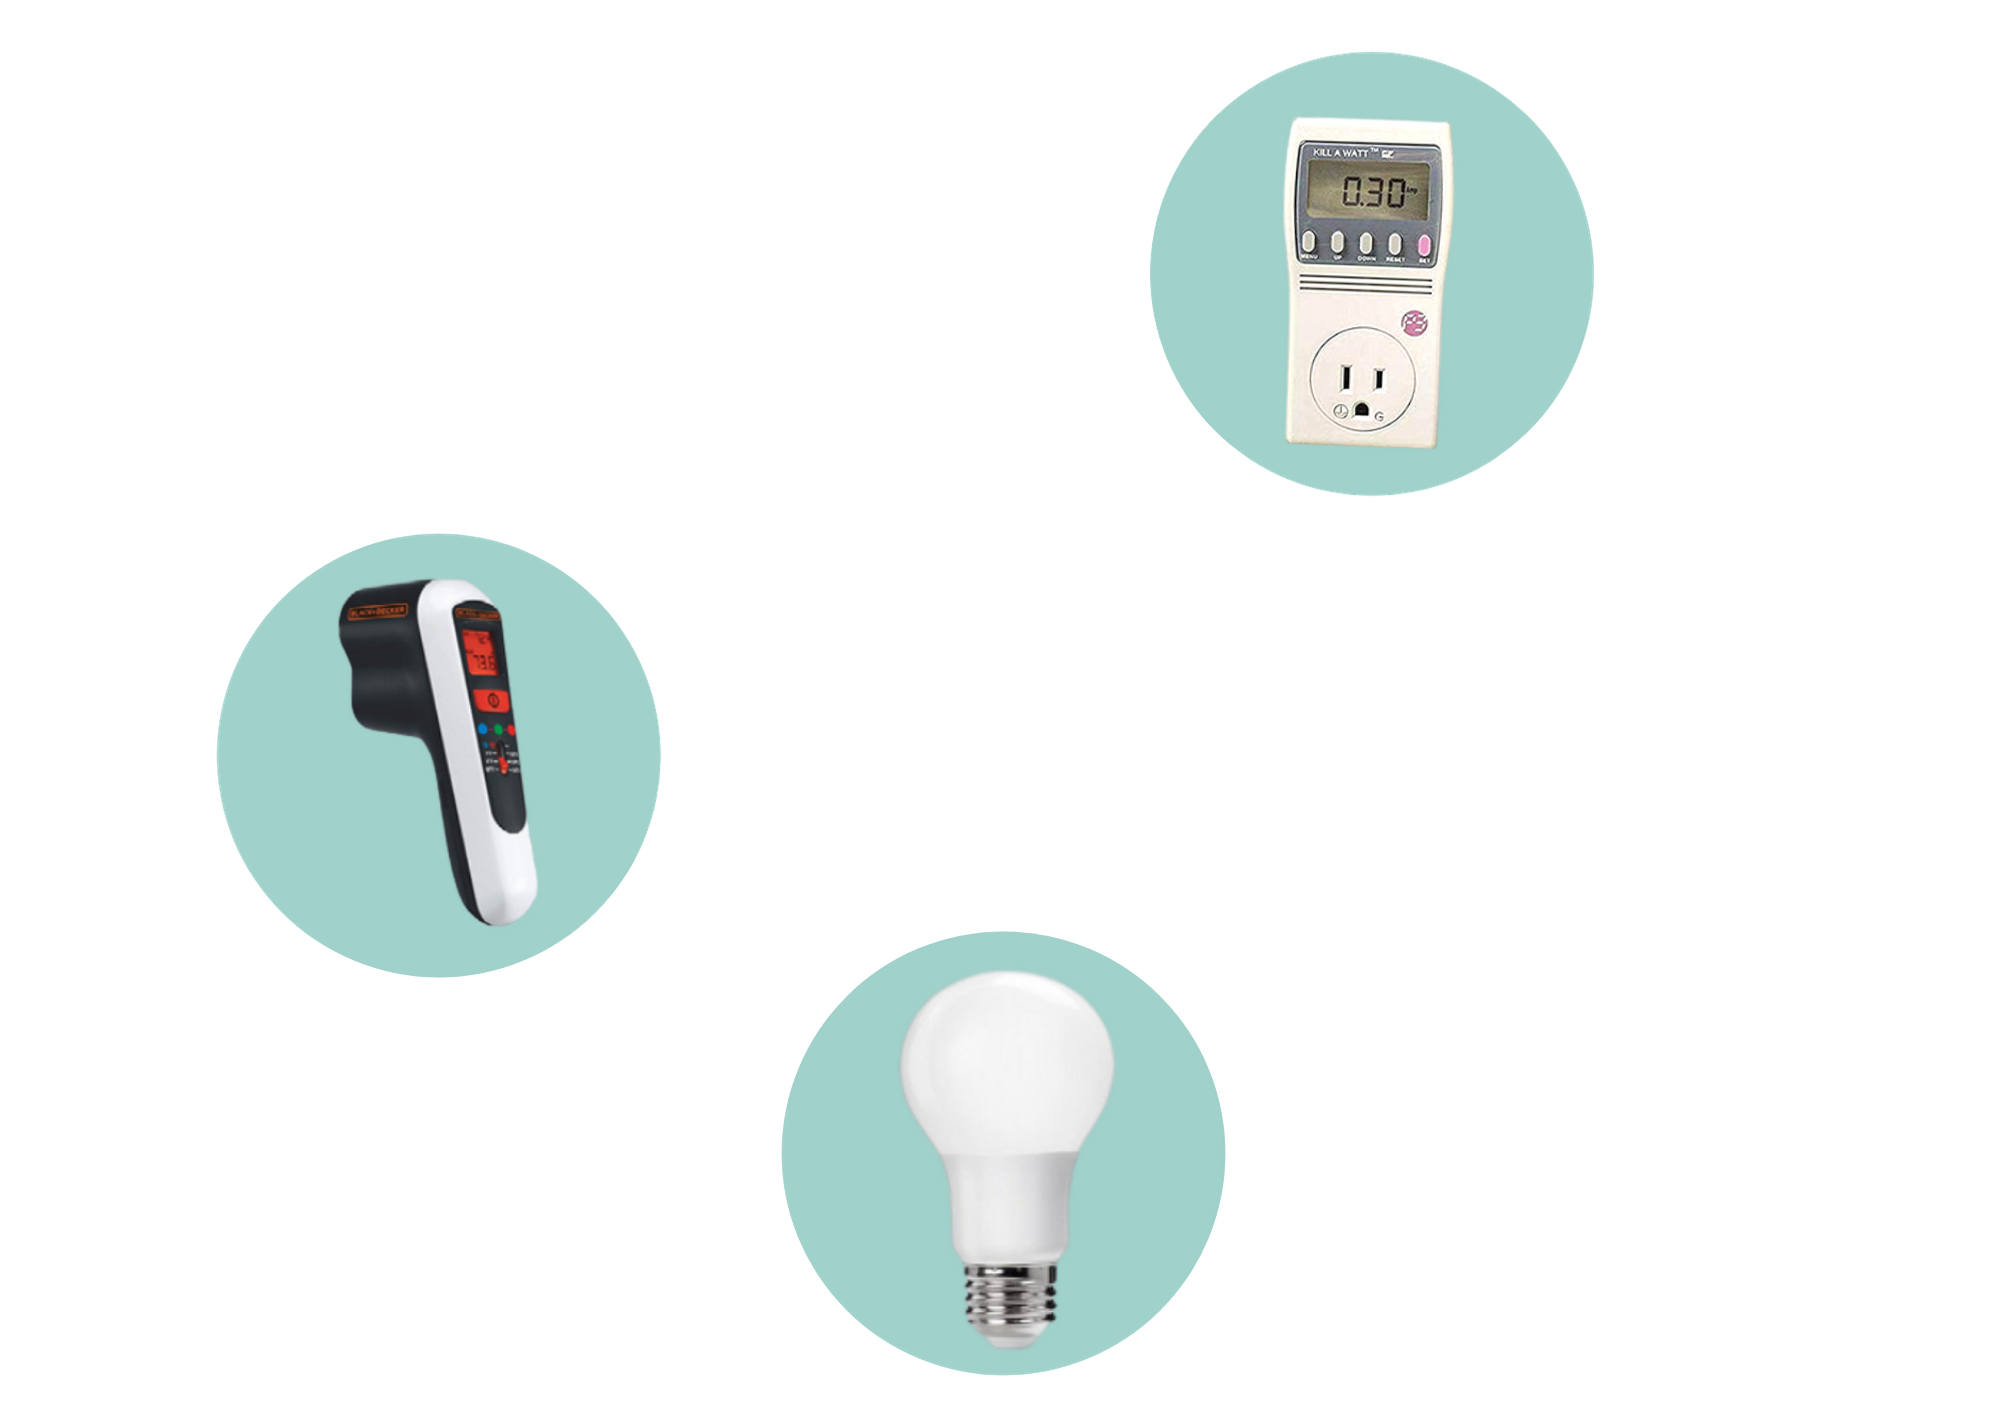 Representation of a treasure map with energy-saving infrared thermometer, kilowatt meter, and LED lightbulb